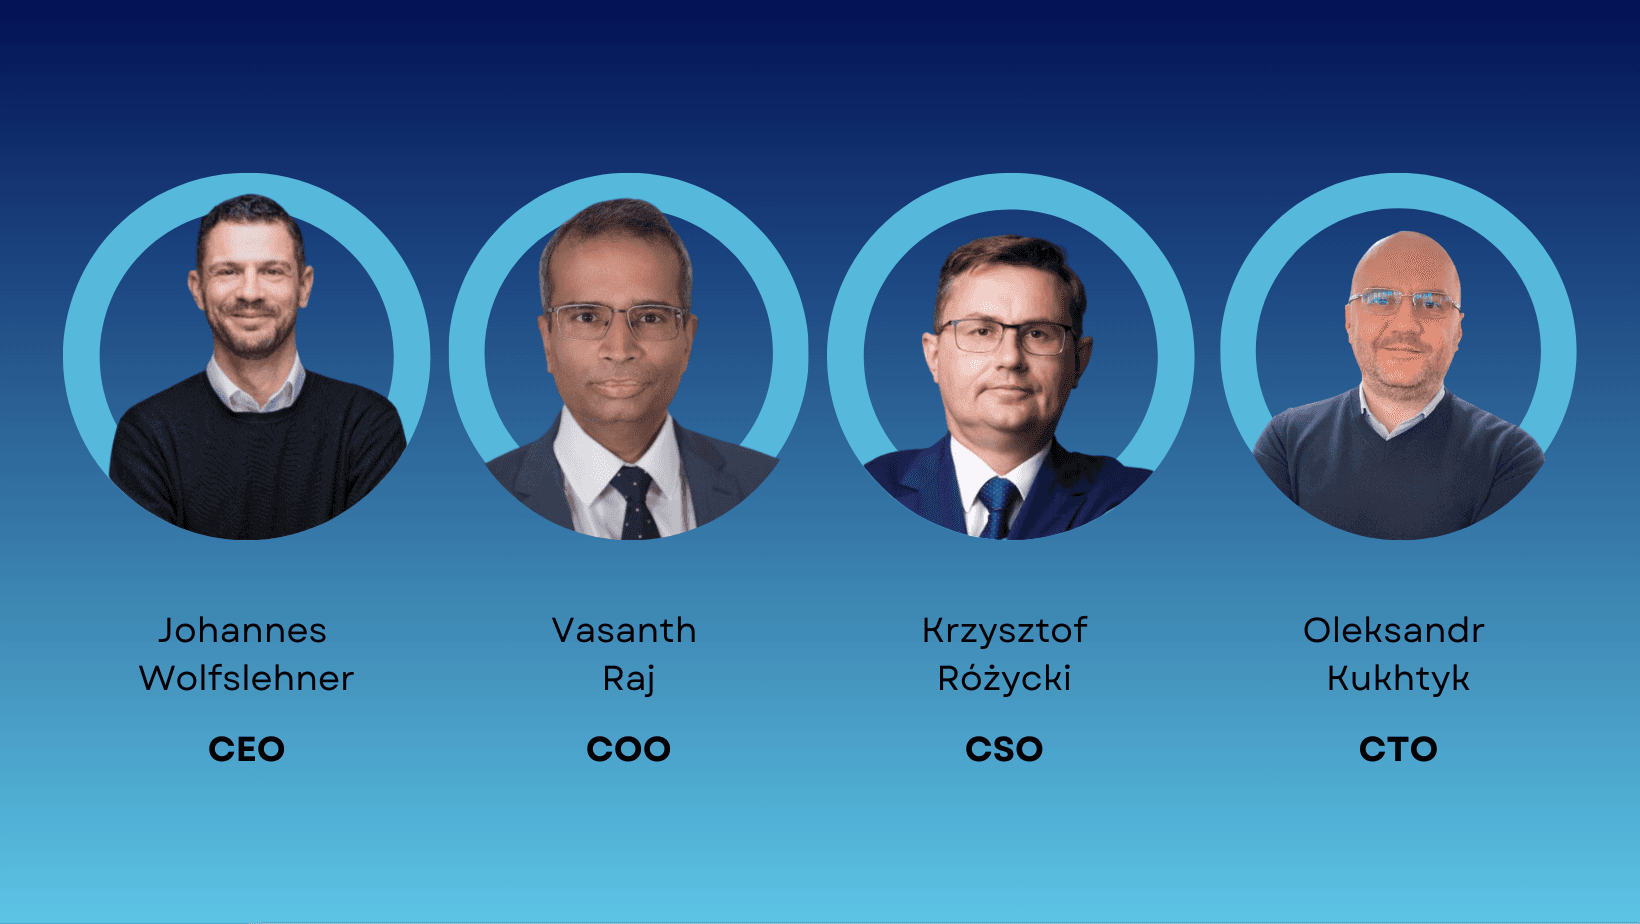 Pictures of the new management team of AxFina with positions